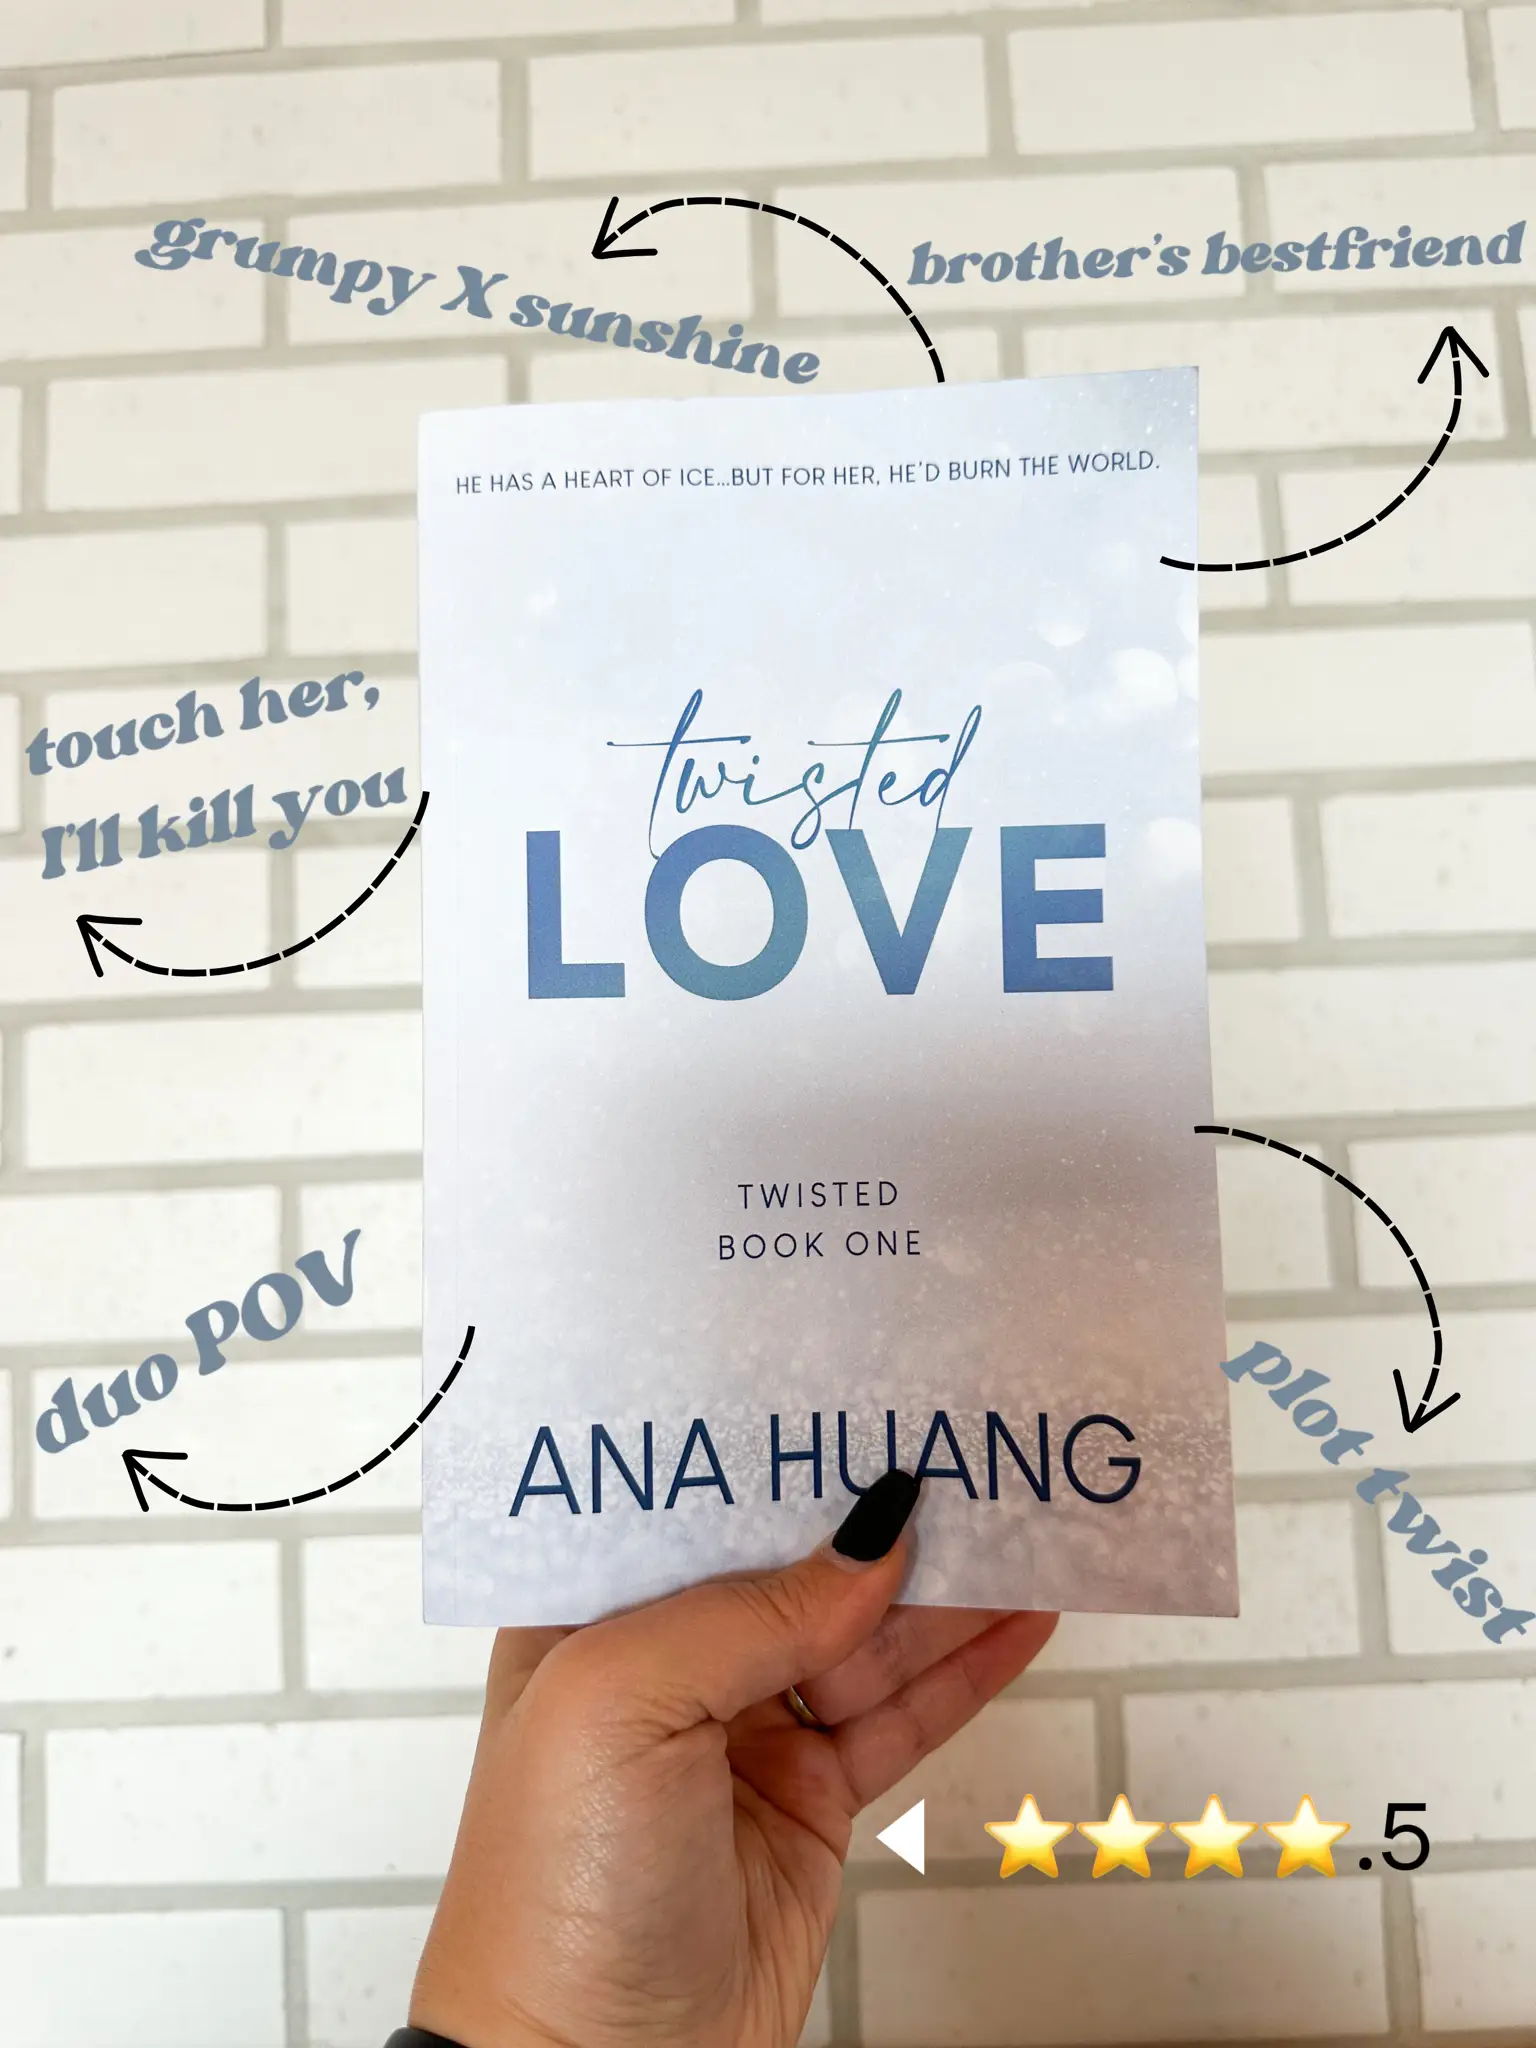 BOOK REVIEW: twisted love by ana huang